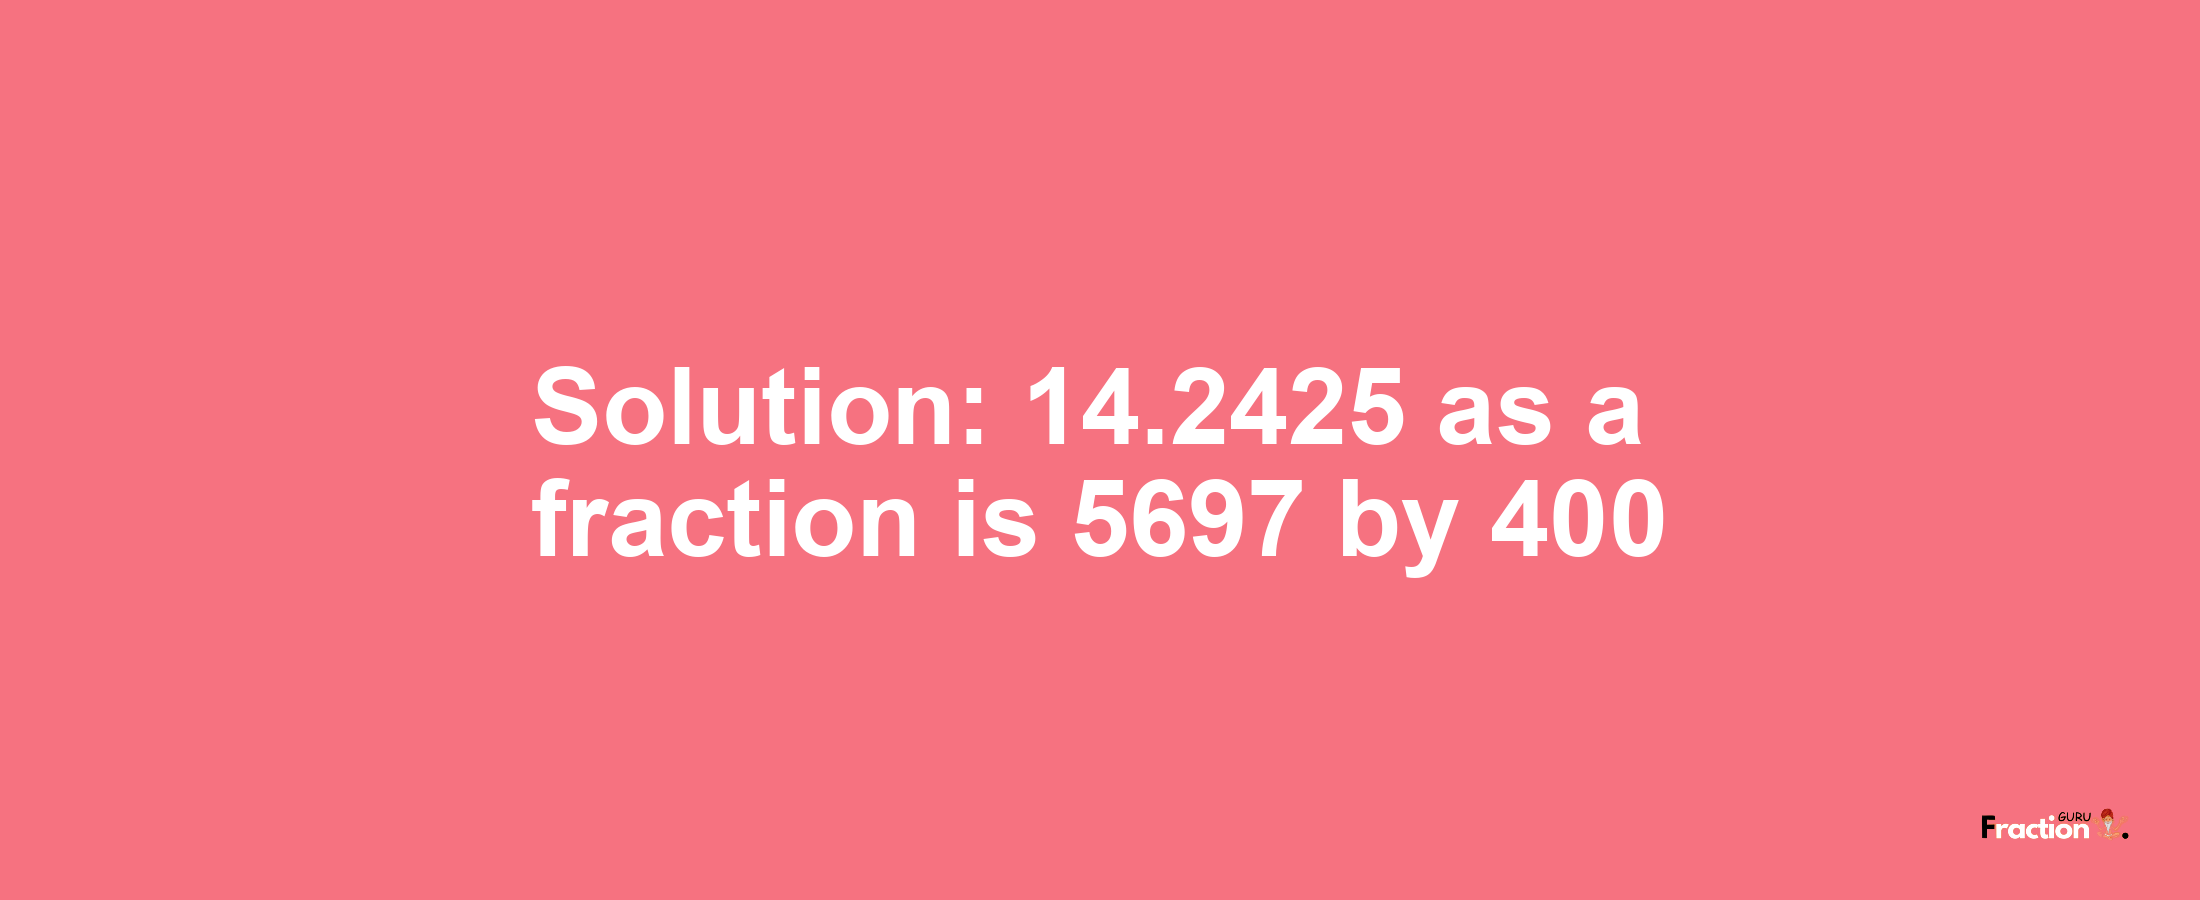 Solution:14.2425 as a fraction is 5697/400